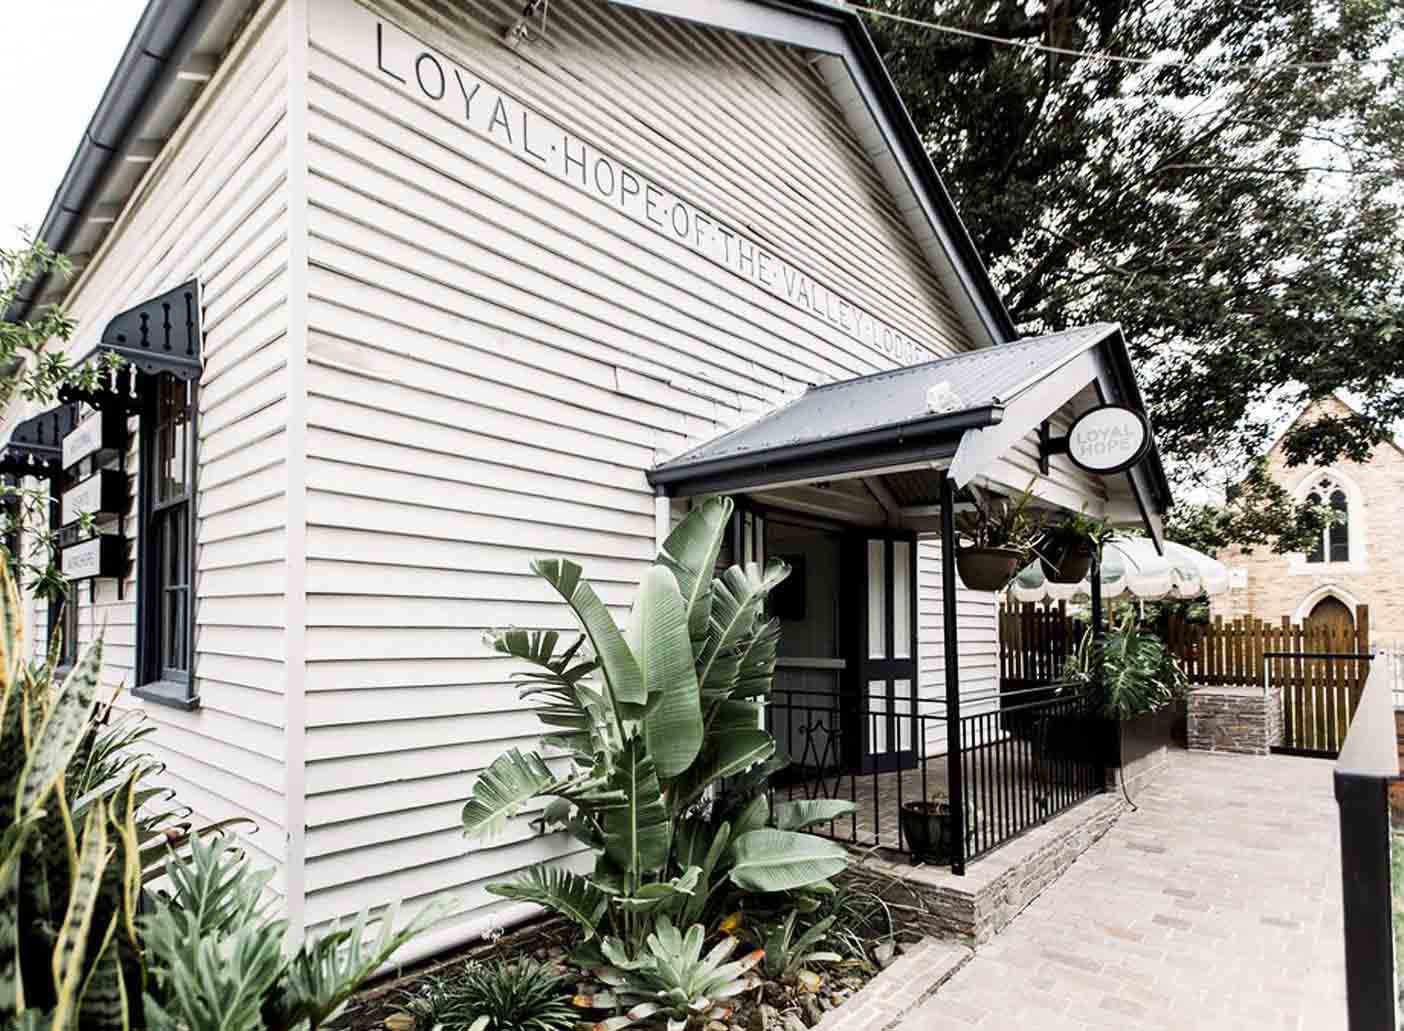 Loyal Hope <br> Heritage Function Rooms